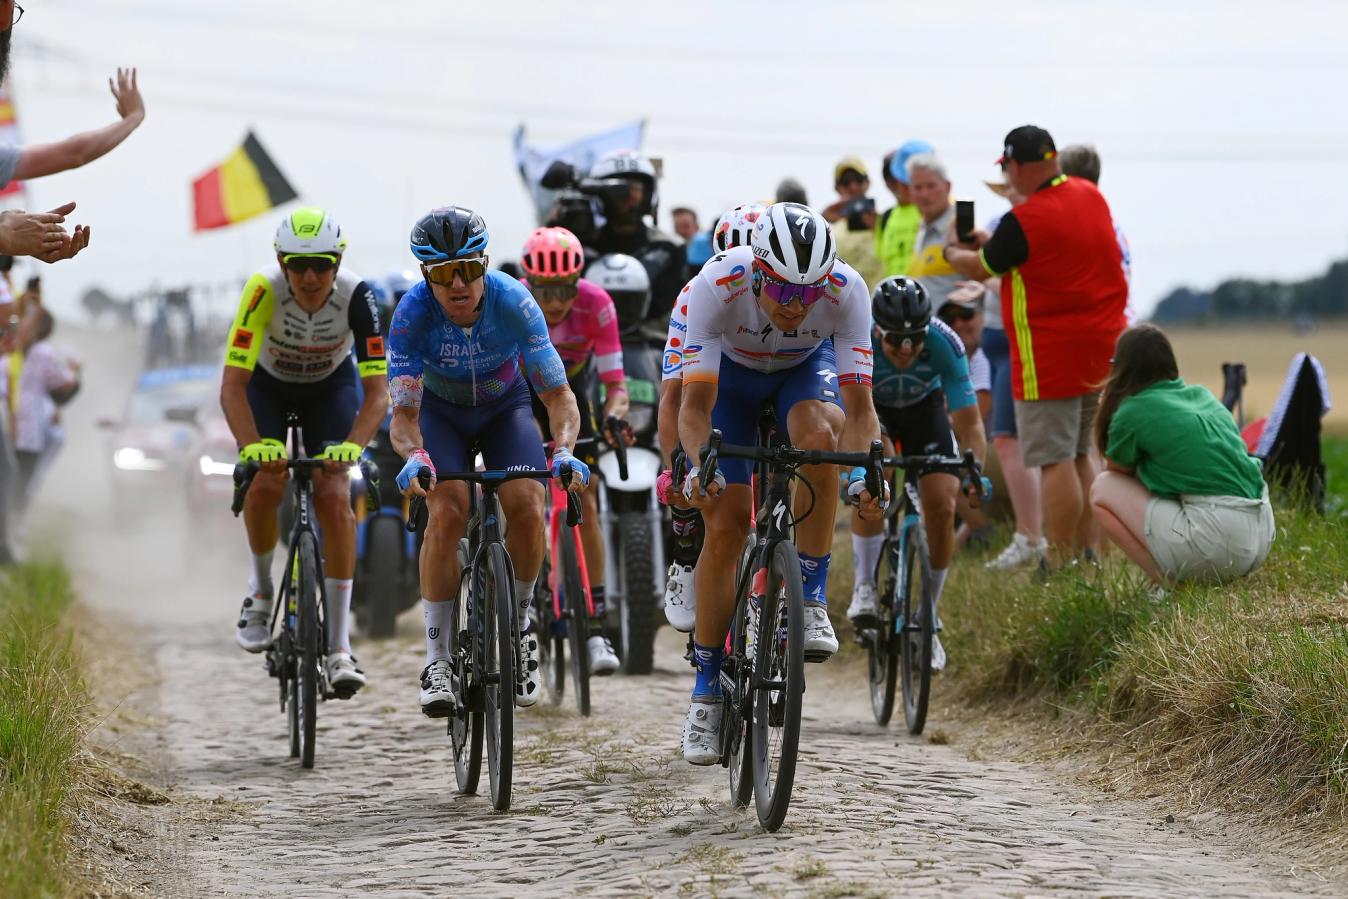 Part of the day's breakaway, Edvald Boasson Hagen rode hard alongside eventual stage-winner Simon Clarke in last year's cobbled stage at the Tour de France